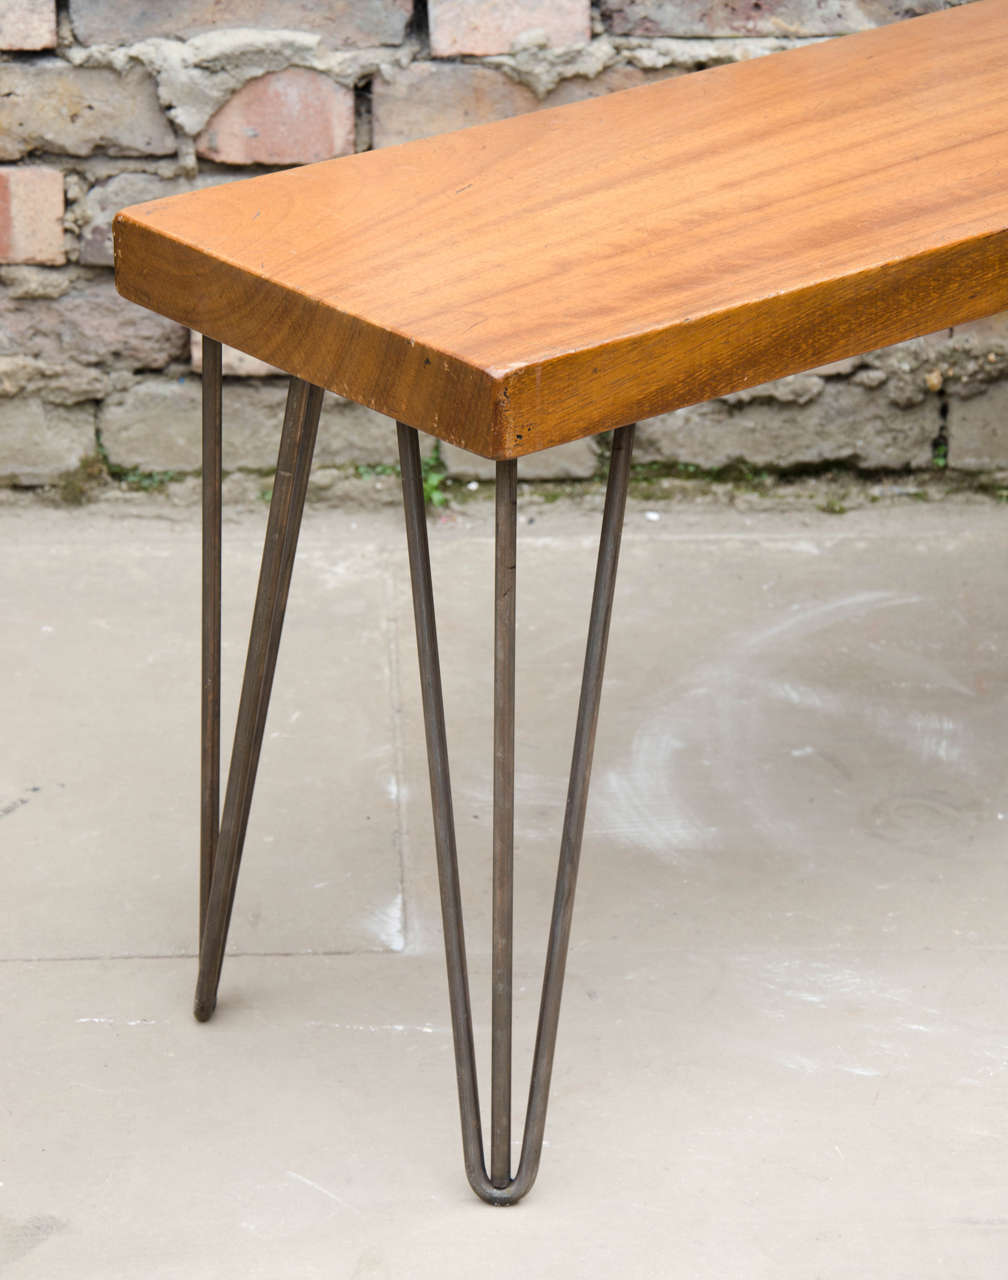 British Retro Teak Benches with Hairpin Legs For Sale